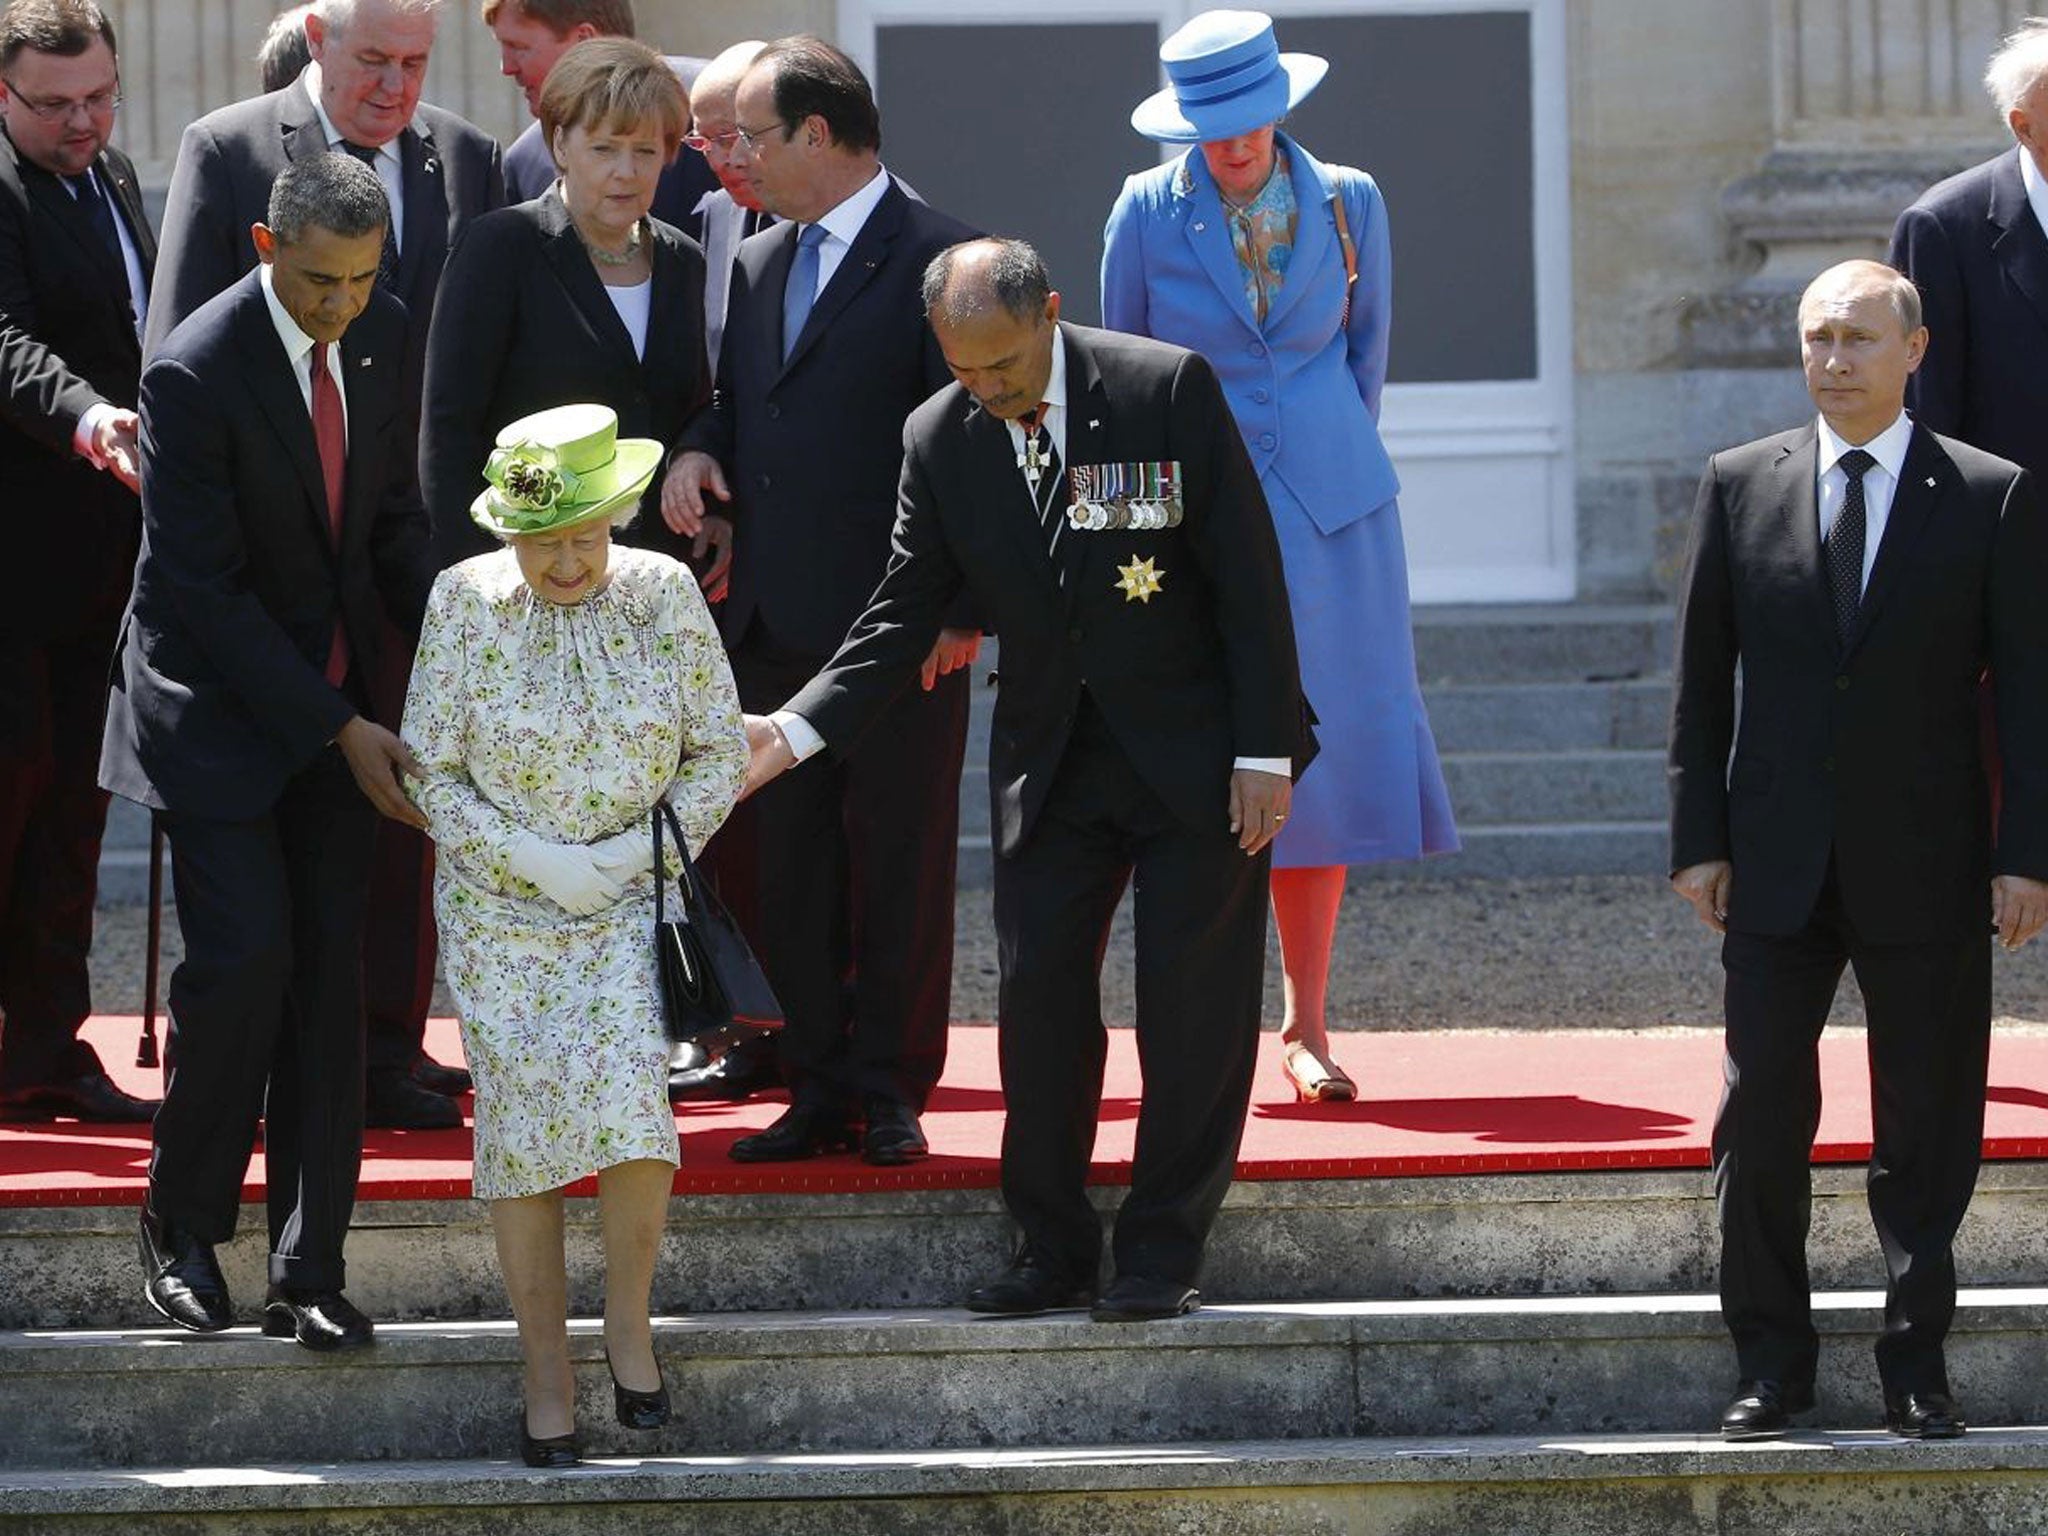 Russian President Vladimir Putin stands at right as U.S. President Barack Obama, left, and New Zealand's Governor-General Jerry Mateparae guide Britain's Queen Elizabeth II to her position for a group photo, with French President Francois Hollande, in the